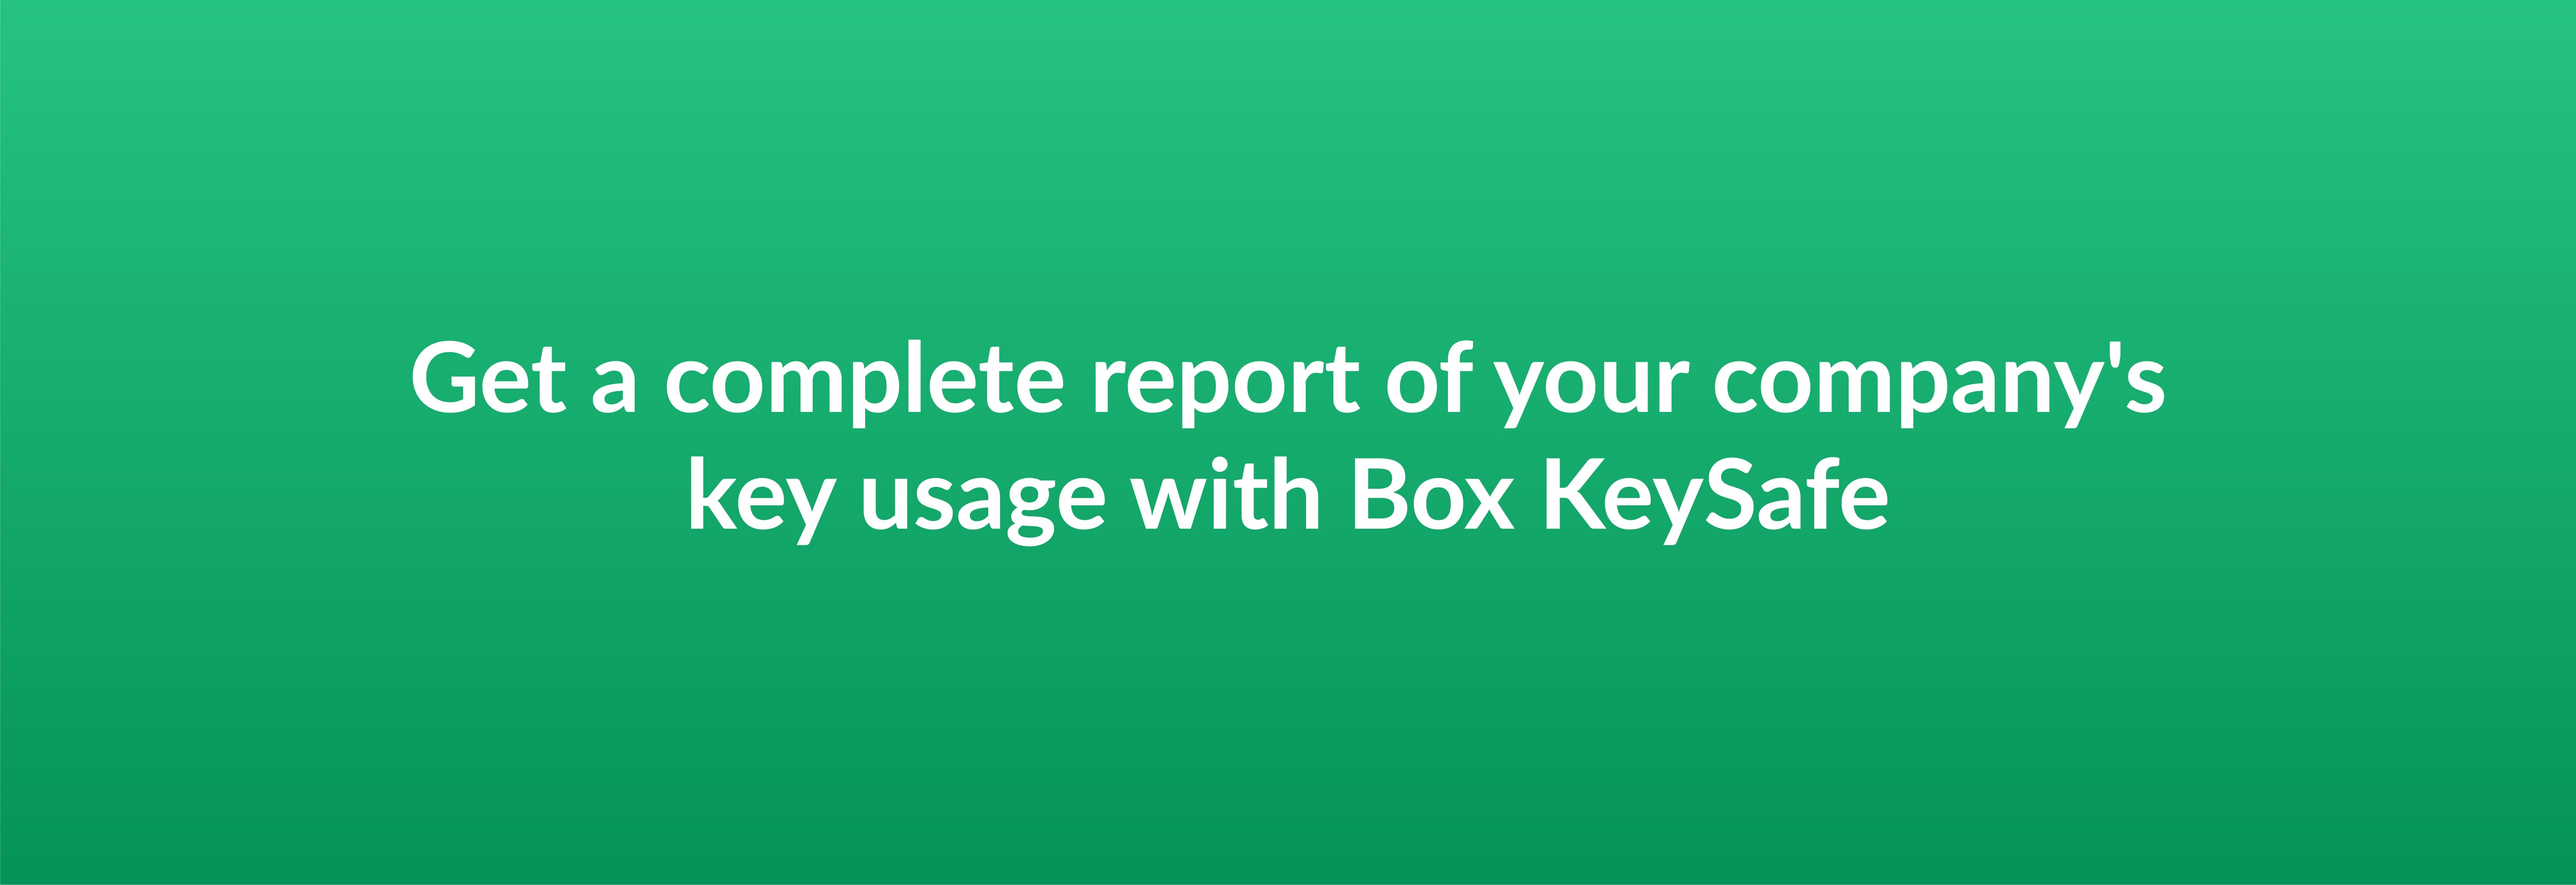 Get a complete report of your company's key usage with Box KeySafe